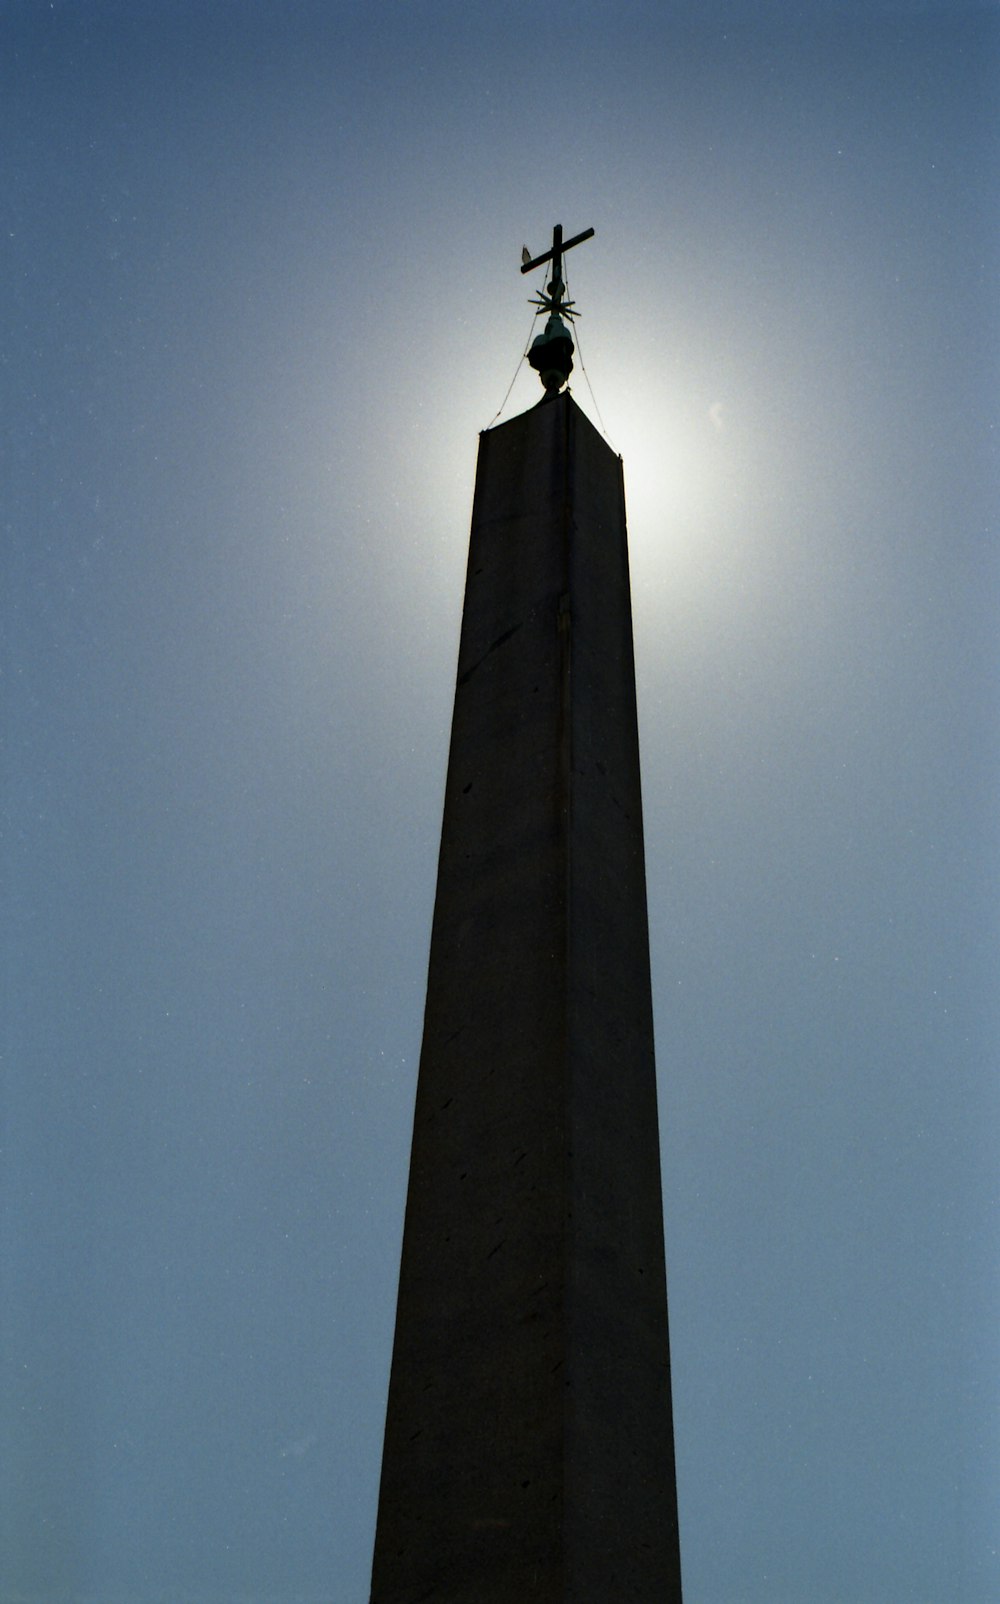 the top of a tall monument with a cross on it